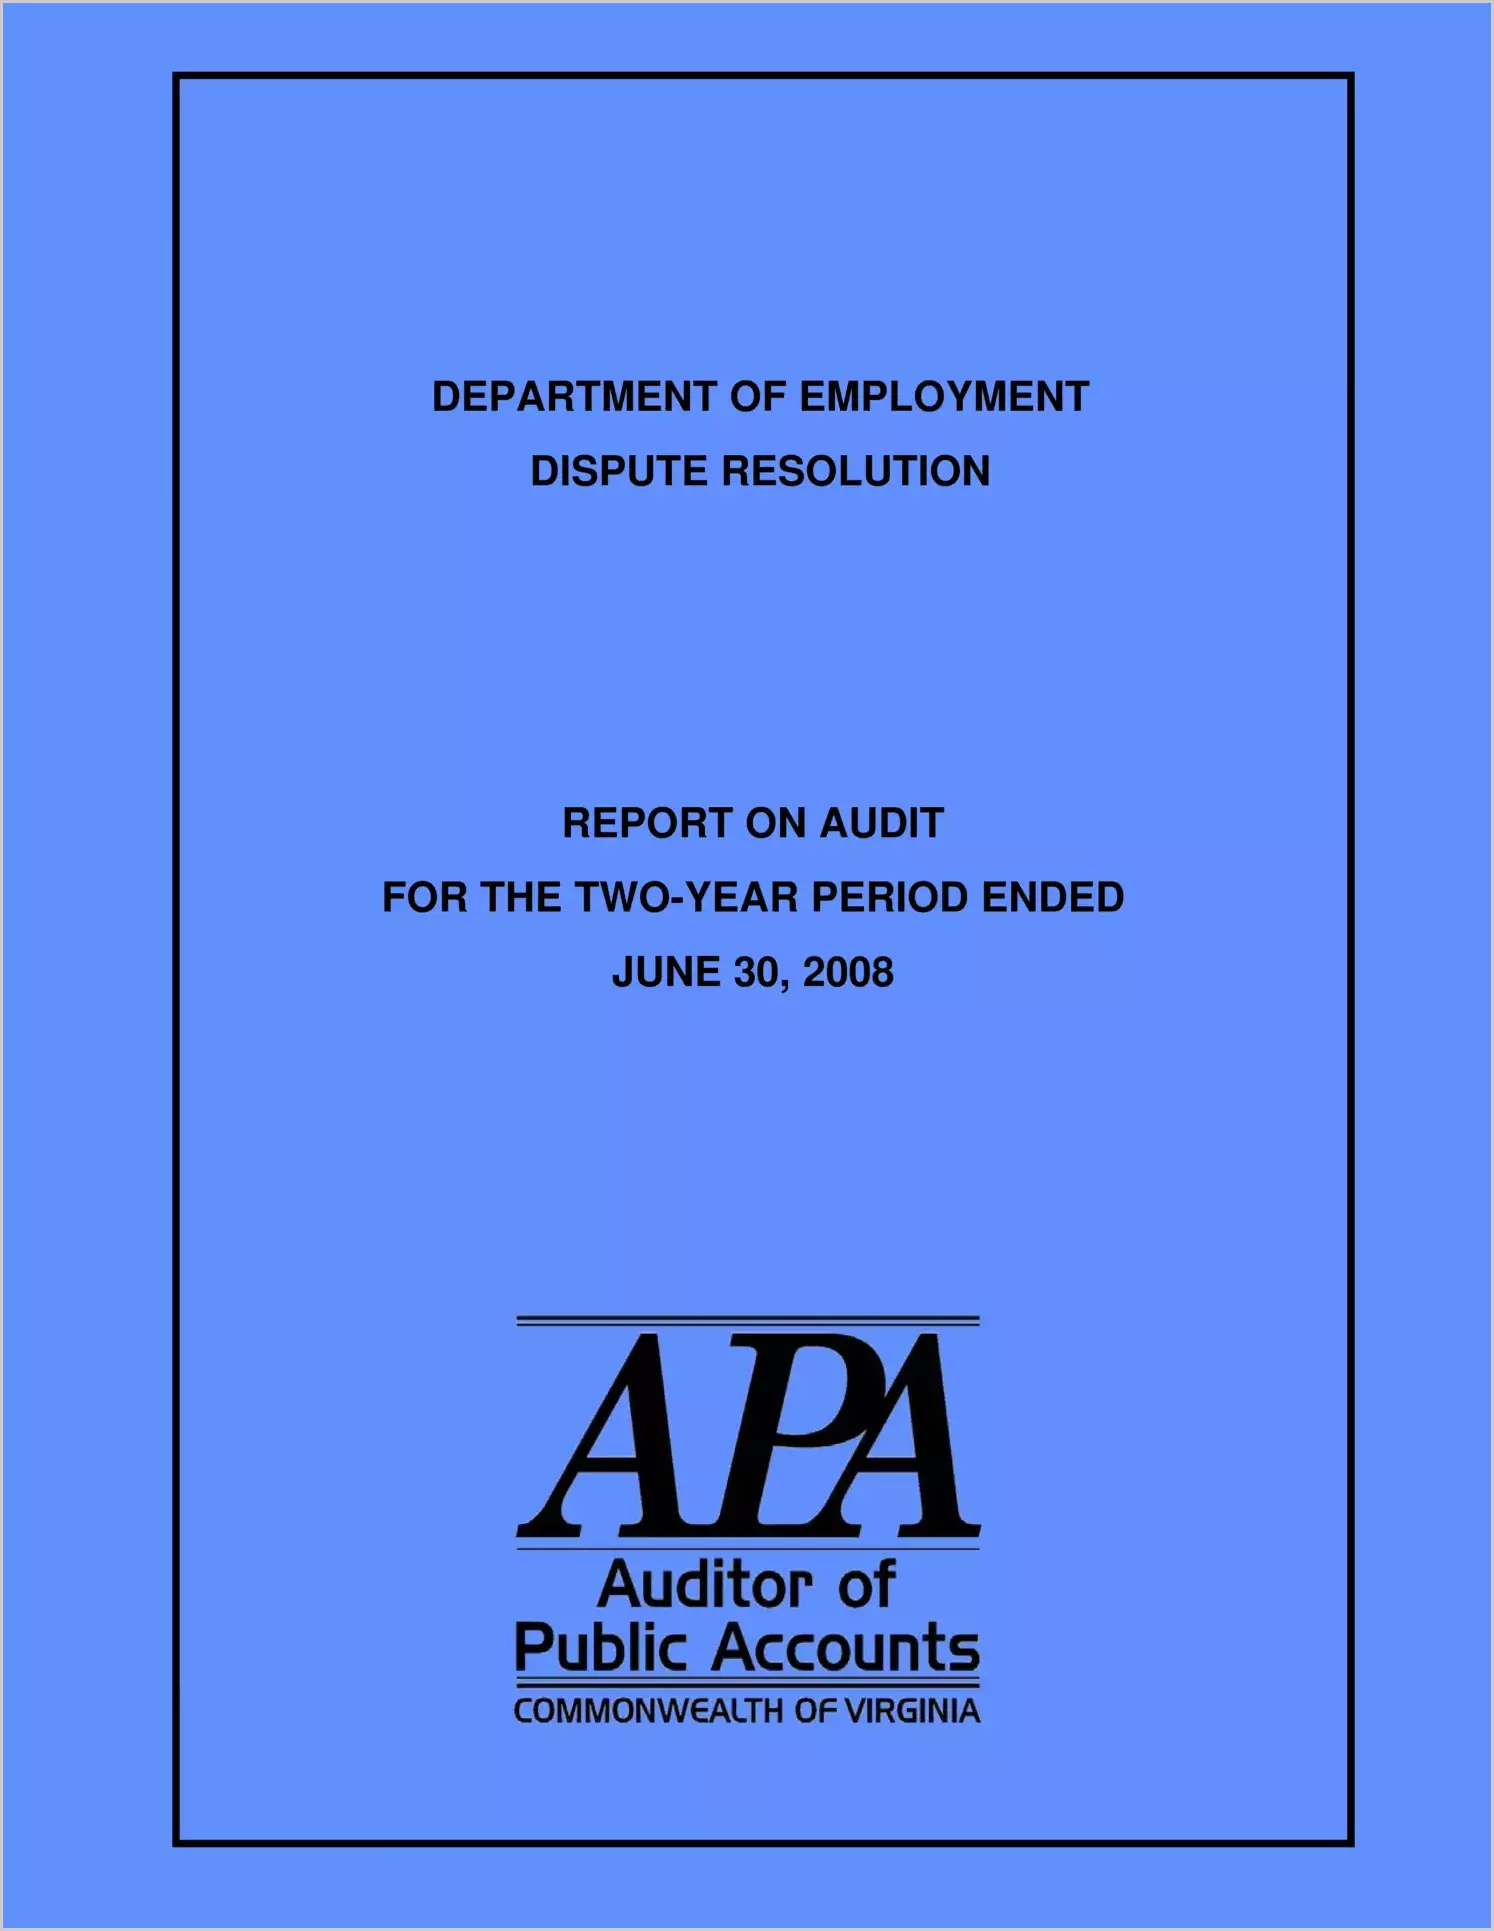 Department of Employment Dispute Resolution for the two-year period ended June 30, 2008